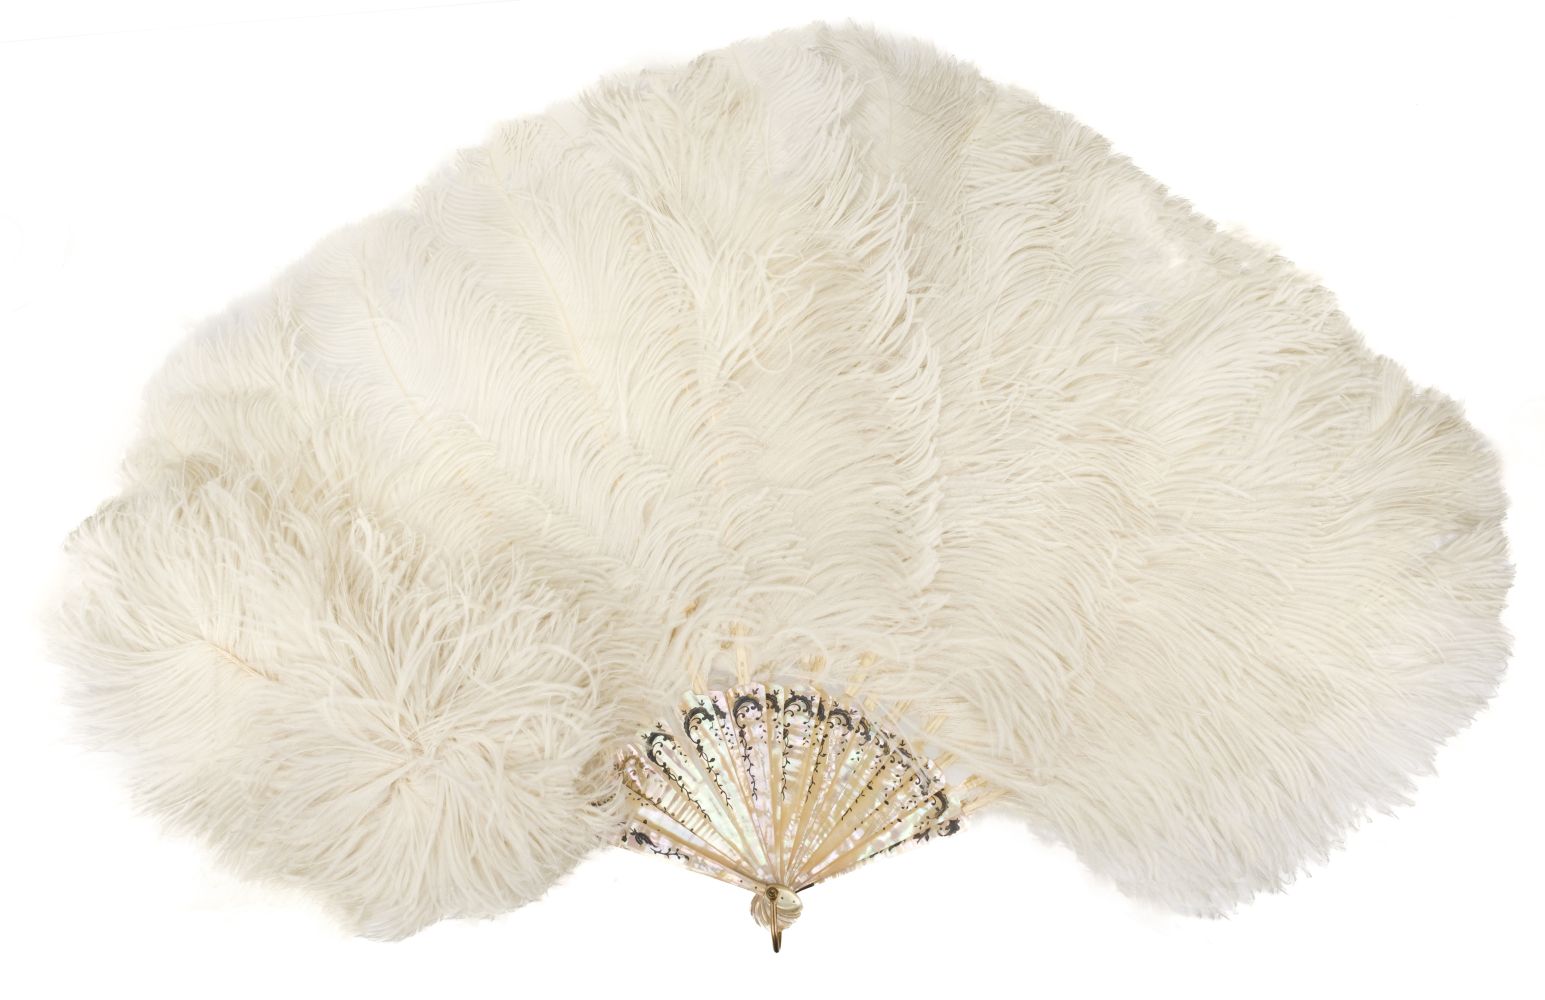 Ostrich feather. A large ostrich feather fan, early 20th century